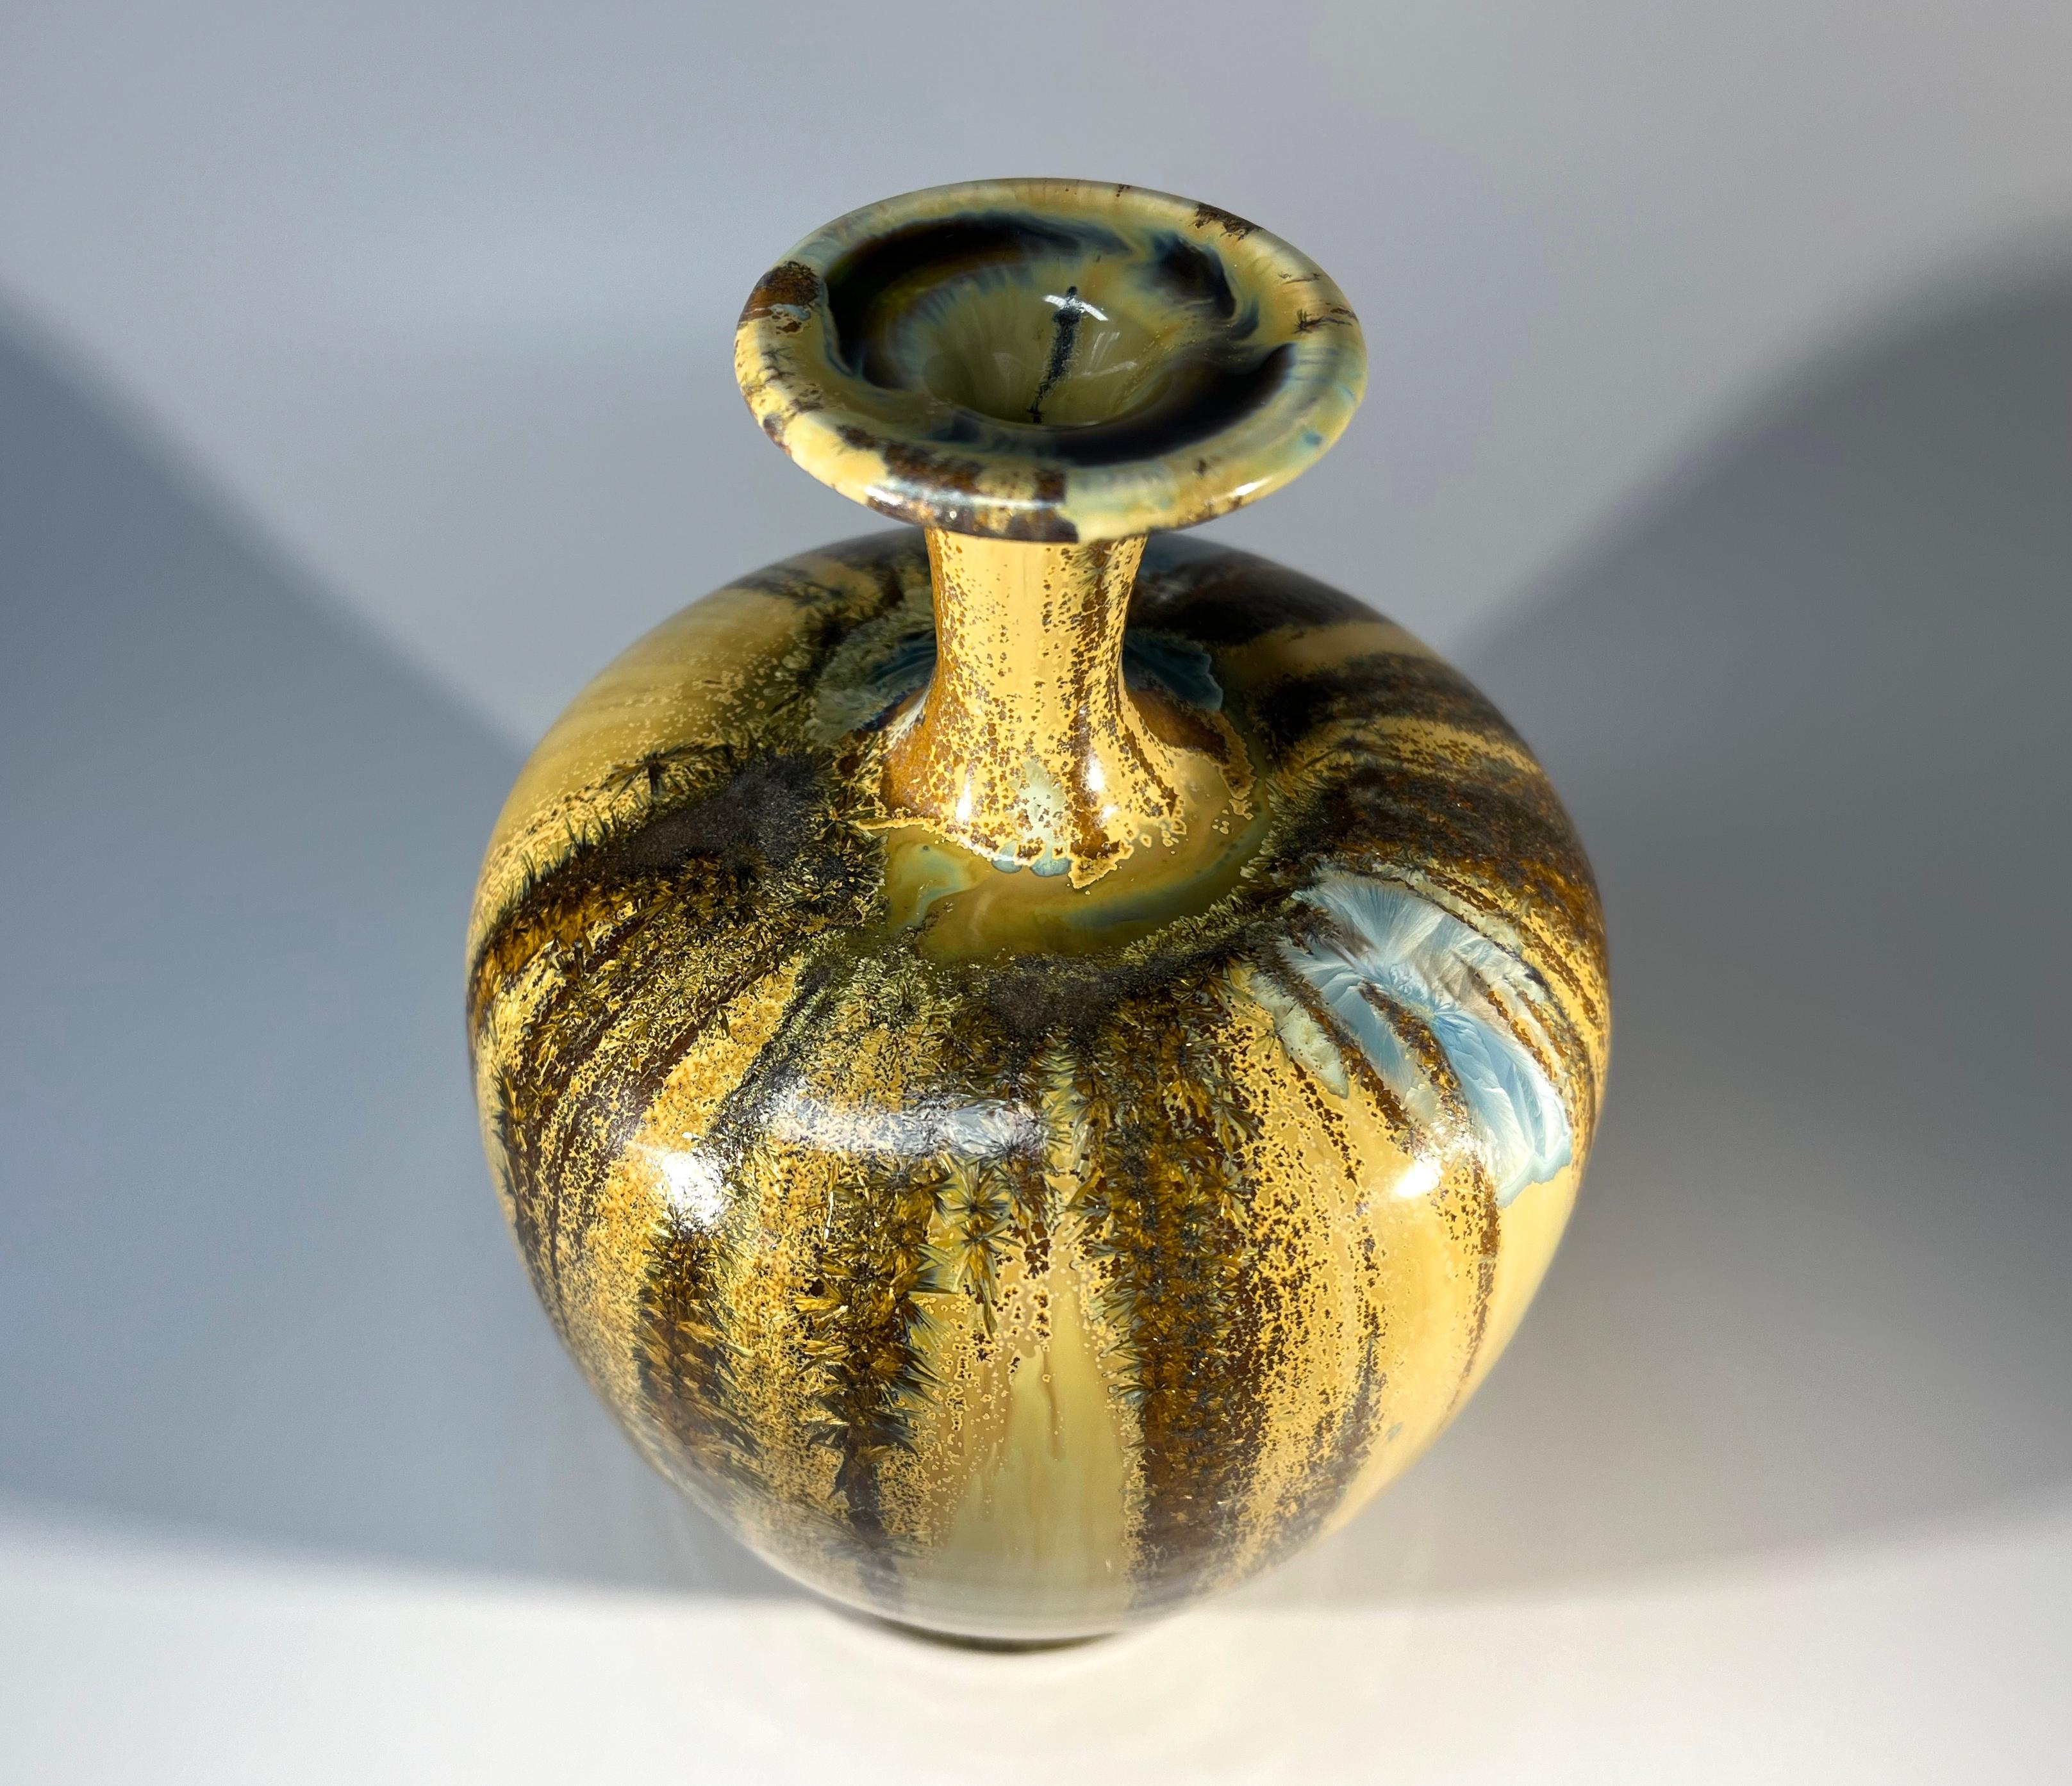 Impeccable Crystalline Glaze Studio Pottery Vase By Maurice Young Sussex England For Sale 4